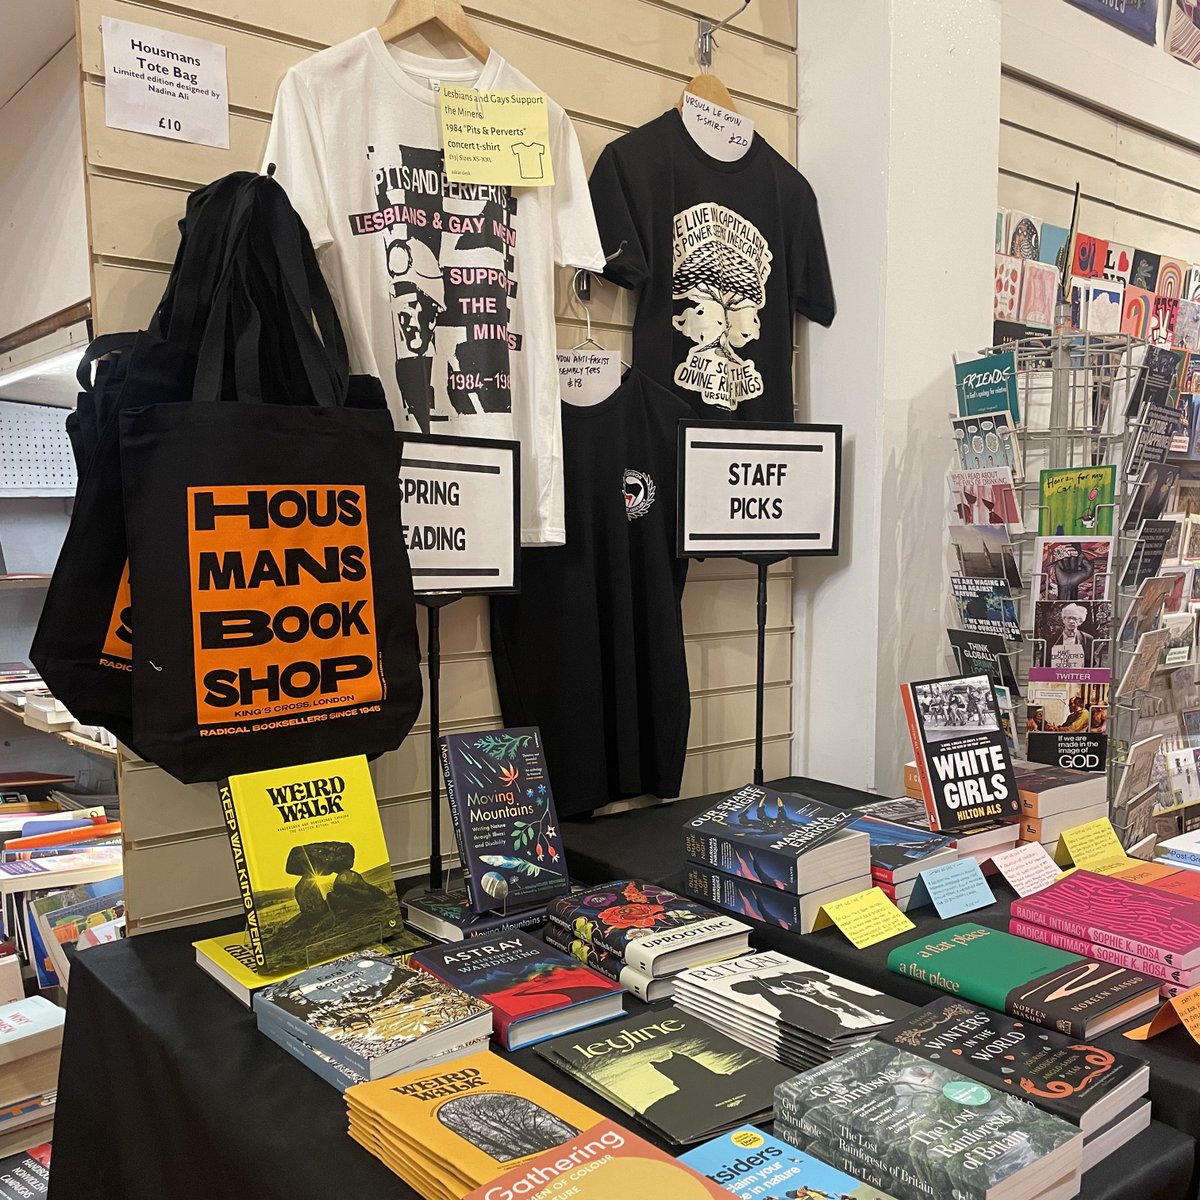 Discover @HousmansBooks one of Britain's longest continuous-running radical bookshops! Explore diverse titles in feminism, pacifism, LGBTQIA+ politics & more. Shop in-store and online, or support Housmans here hive.co.uk/Shops/Housmans…! 📚✨ #Bookshops #choosebookshops #books